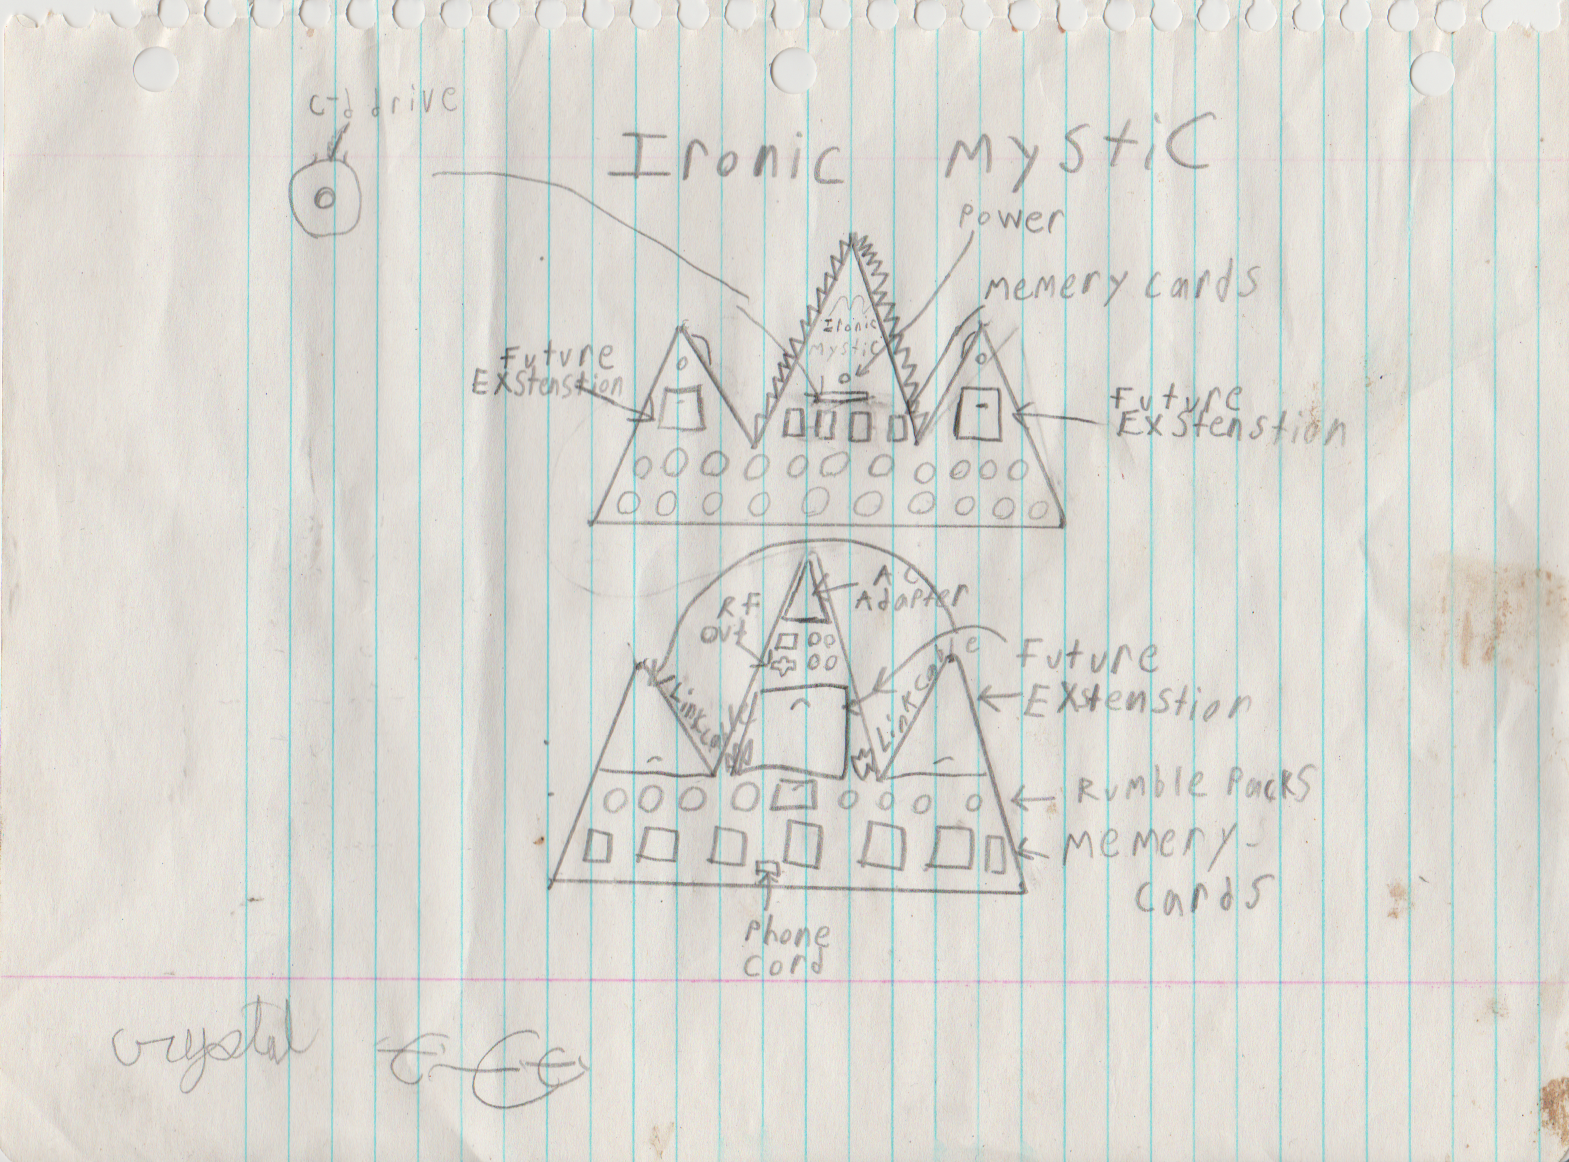 1998 maybe, Joey Arnold drew a video game console idea called Ironic Mystic.png